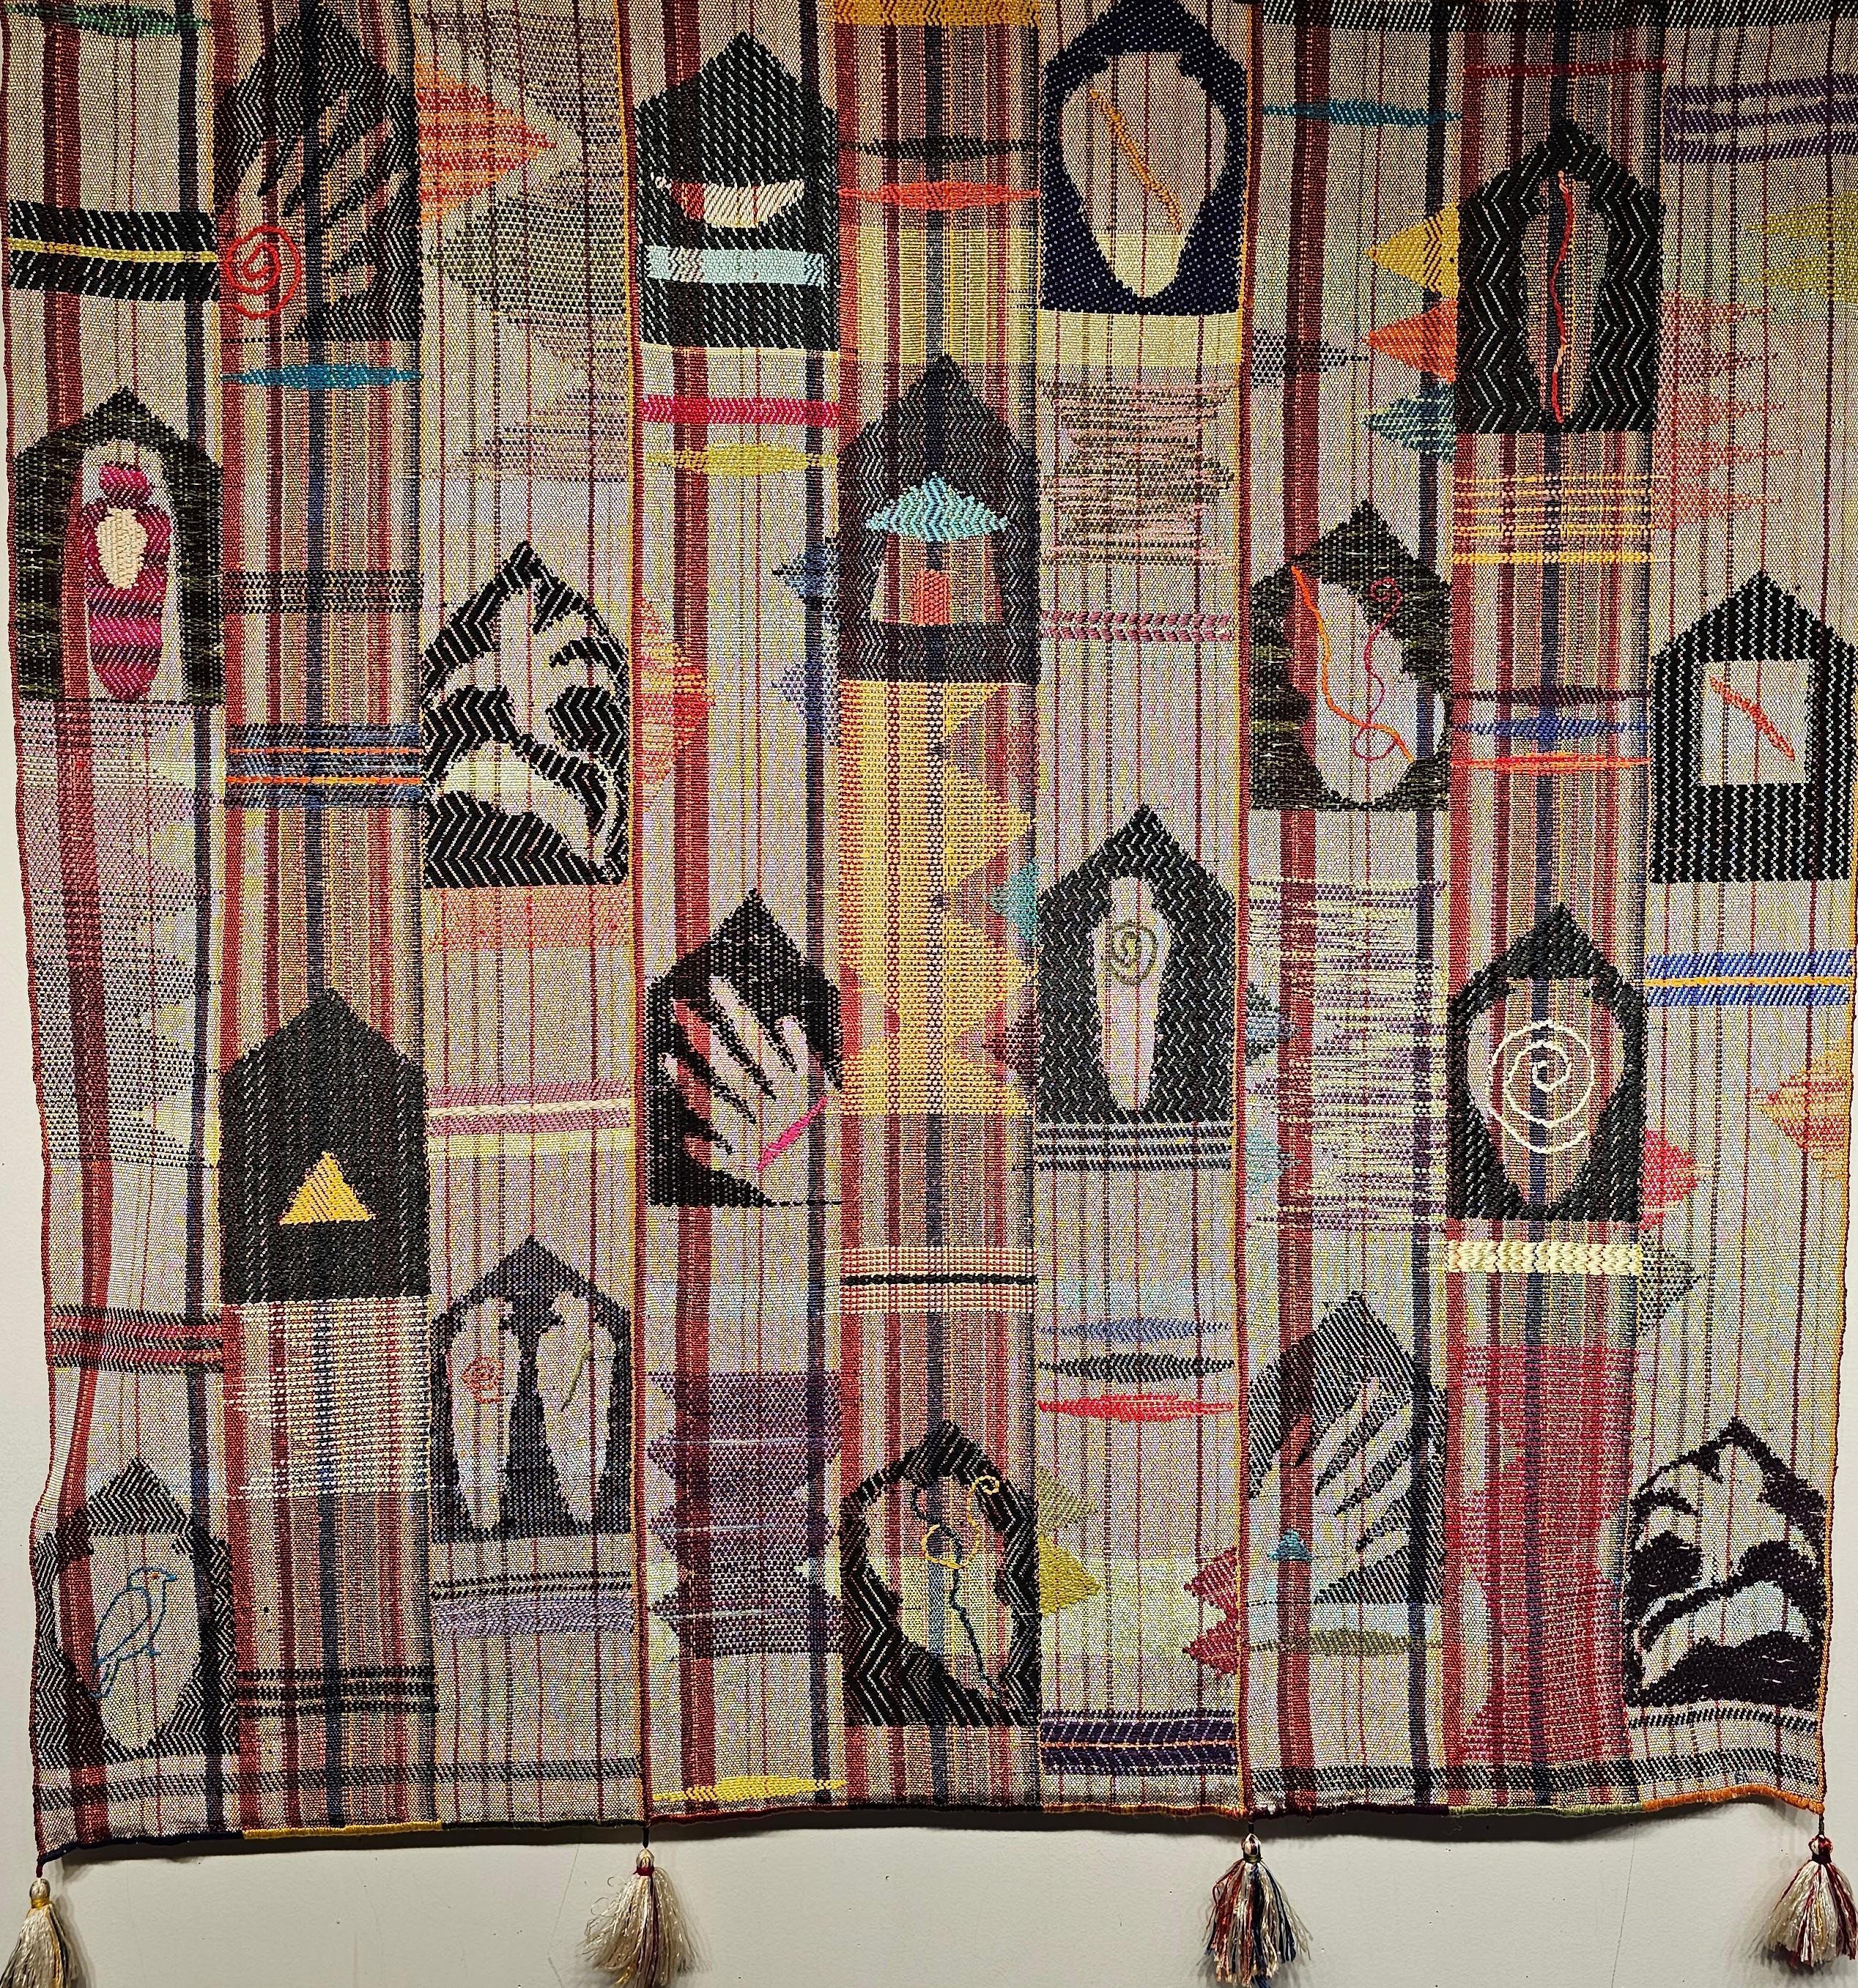 Vintage Handwoven Mid Century Modern Textile Tapestry Wall Art circa the late 1900s. The tapestry has various geometric and figural forms scattered throughout the field. The use of metallic weft and silk in brilliant colors gives a depth to the